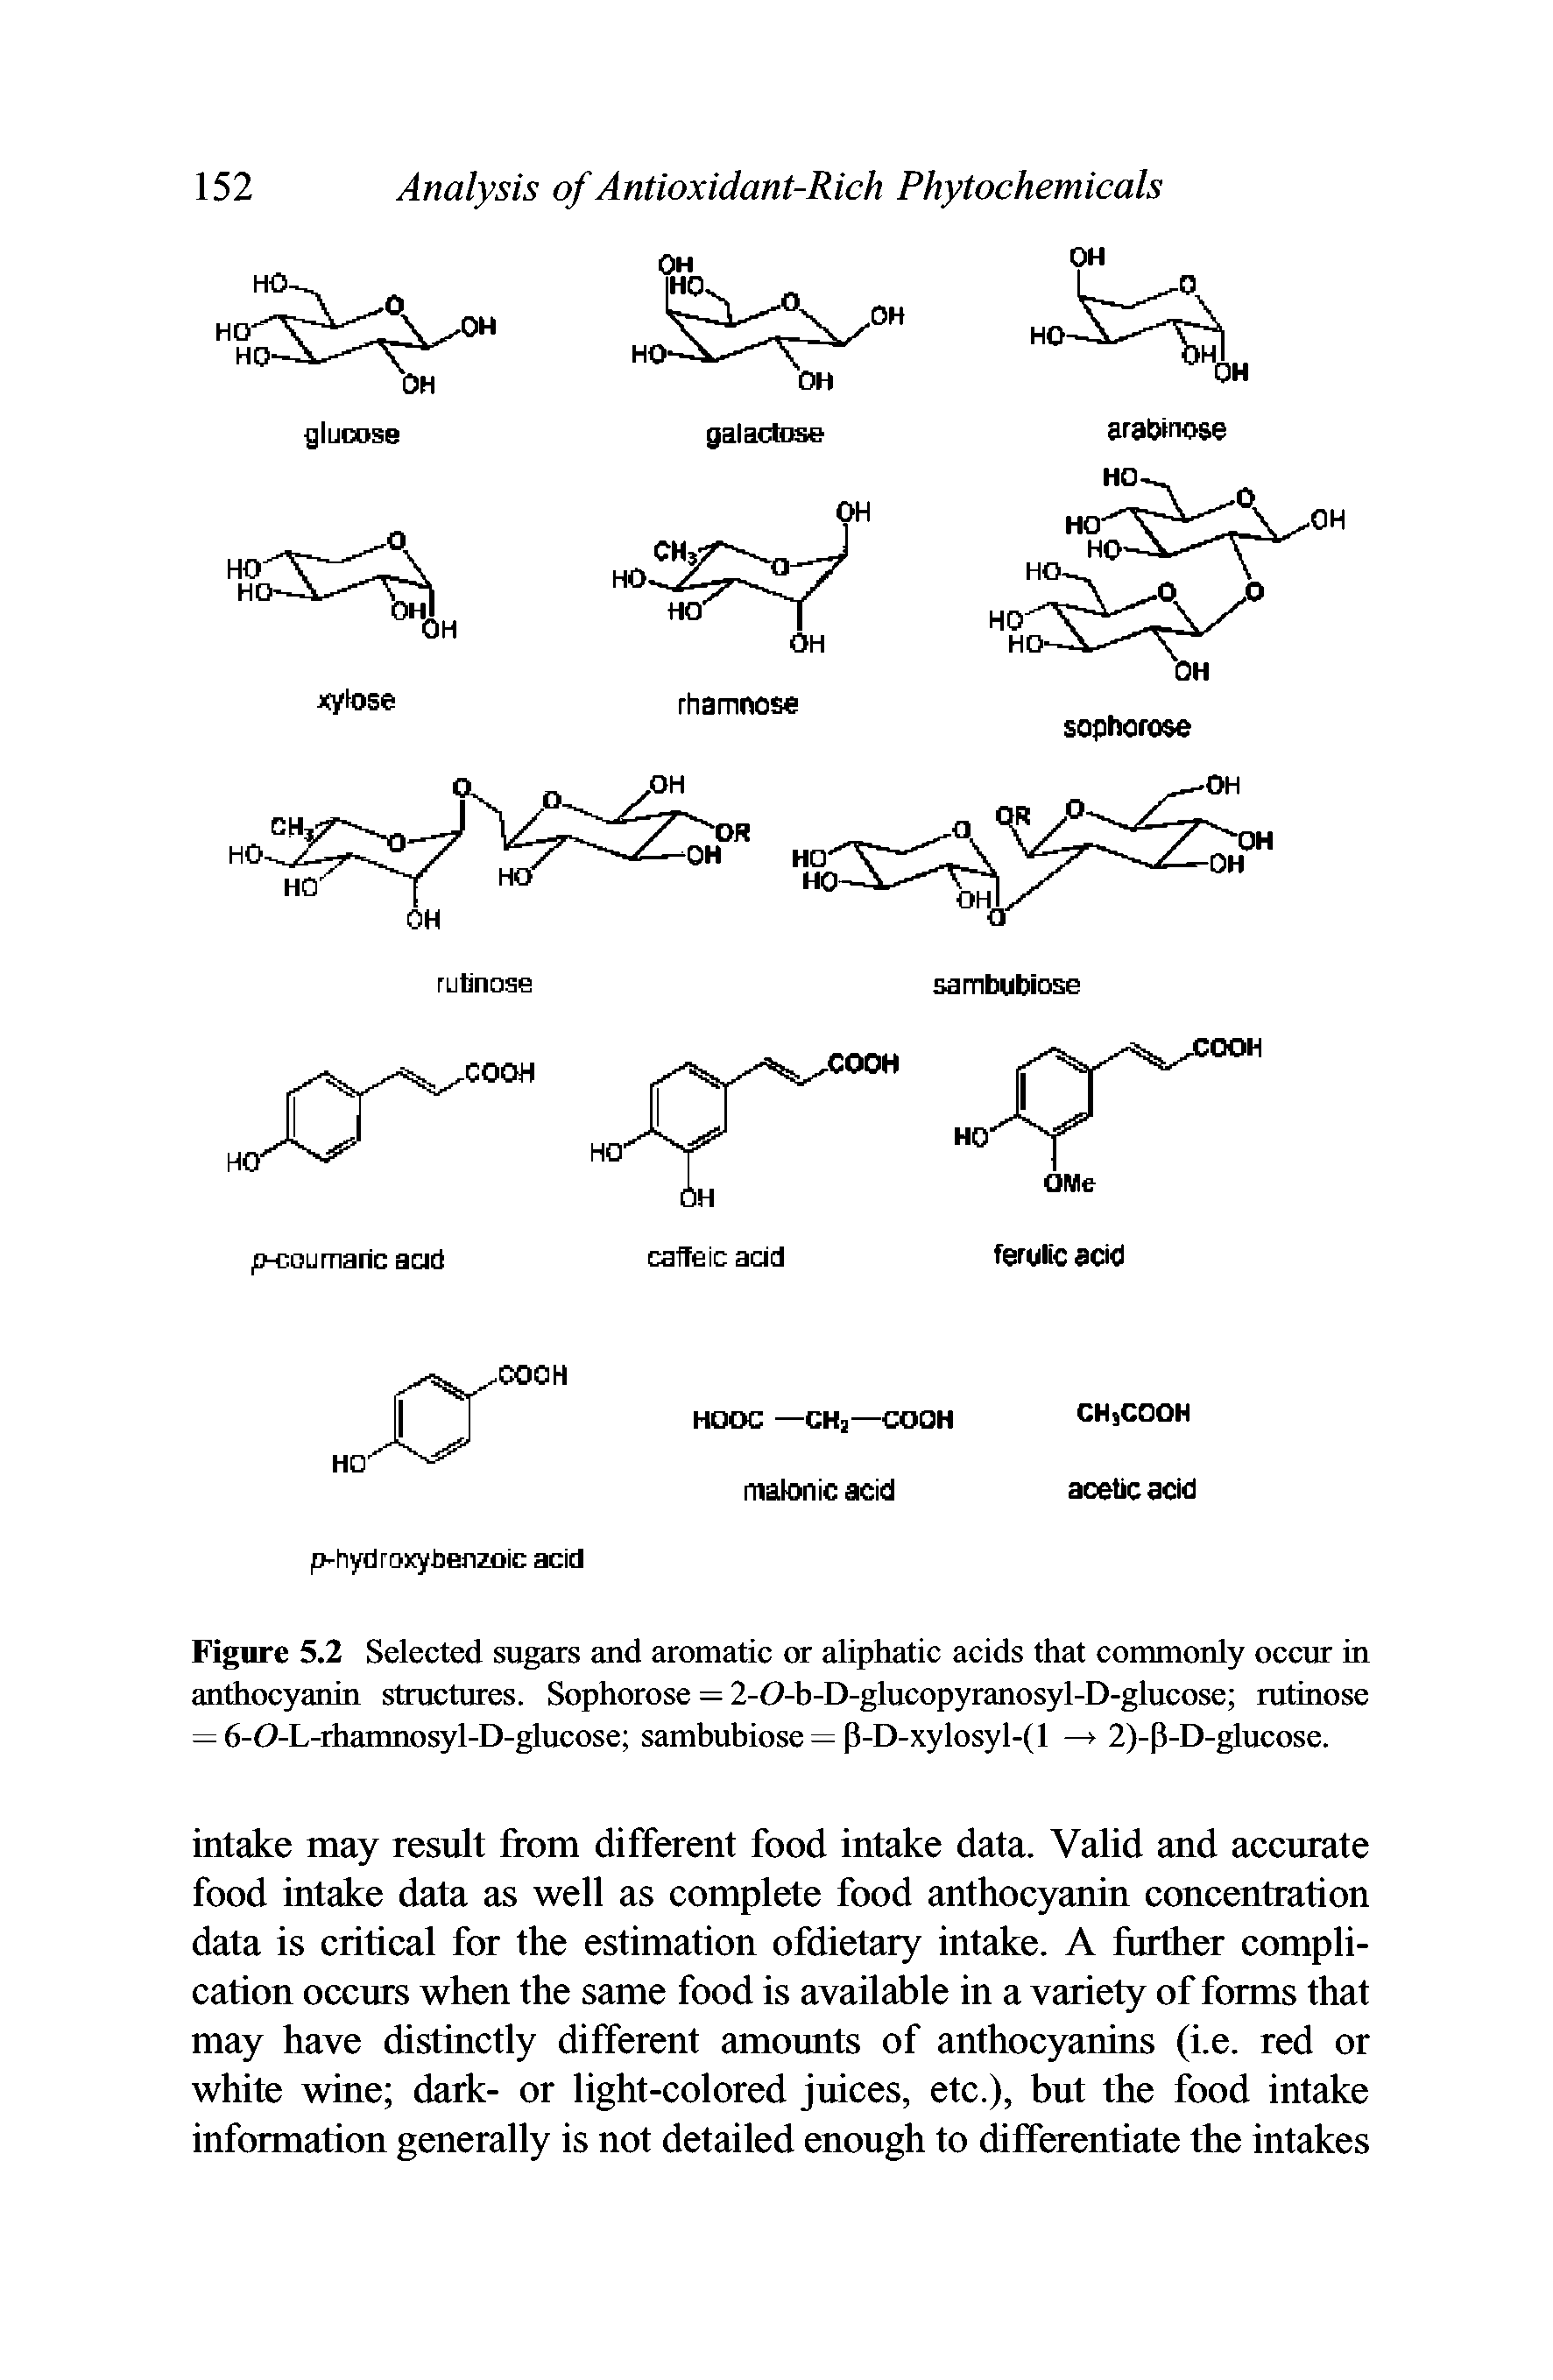 Figure 5.2 Selected sugars and aromatic or aliphatic acids that commonly occur in anthocyanin structures. Sophorose = 2-O-b-D-glucopyranosyl-D-glucose rutinose = 6-O-L-rhamnosyl-D-glucose sambubiose = P-D-xylosyl-(l 2)-P-D-glucose.